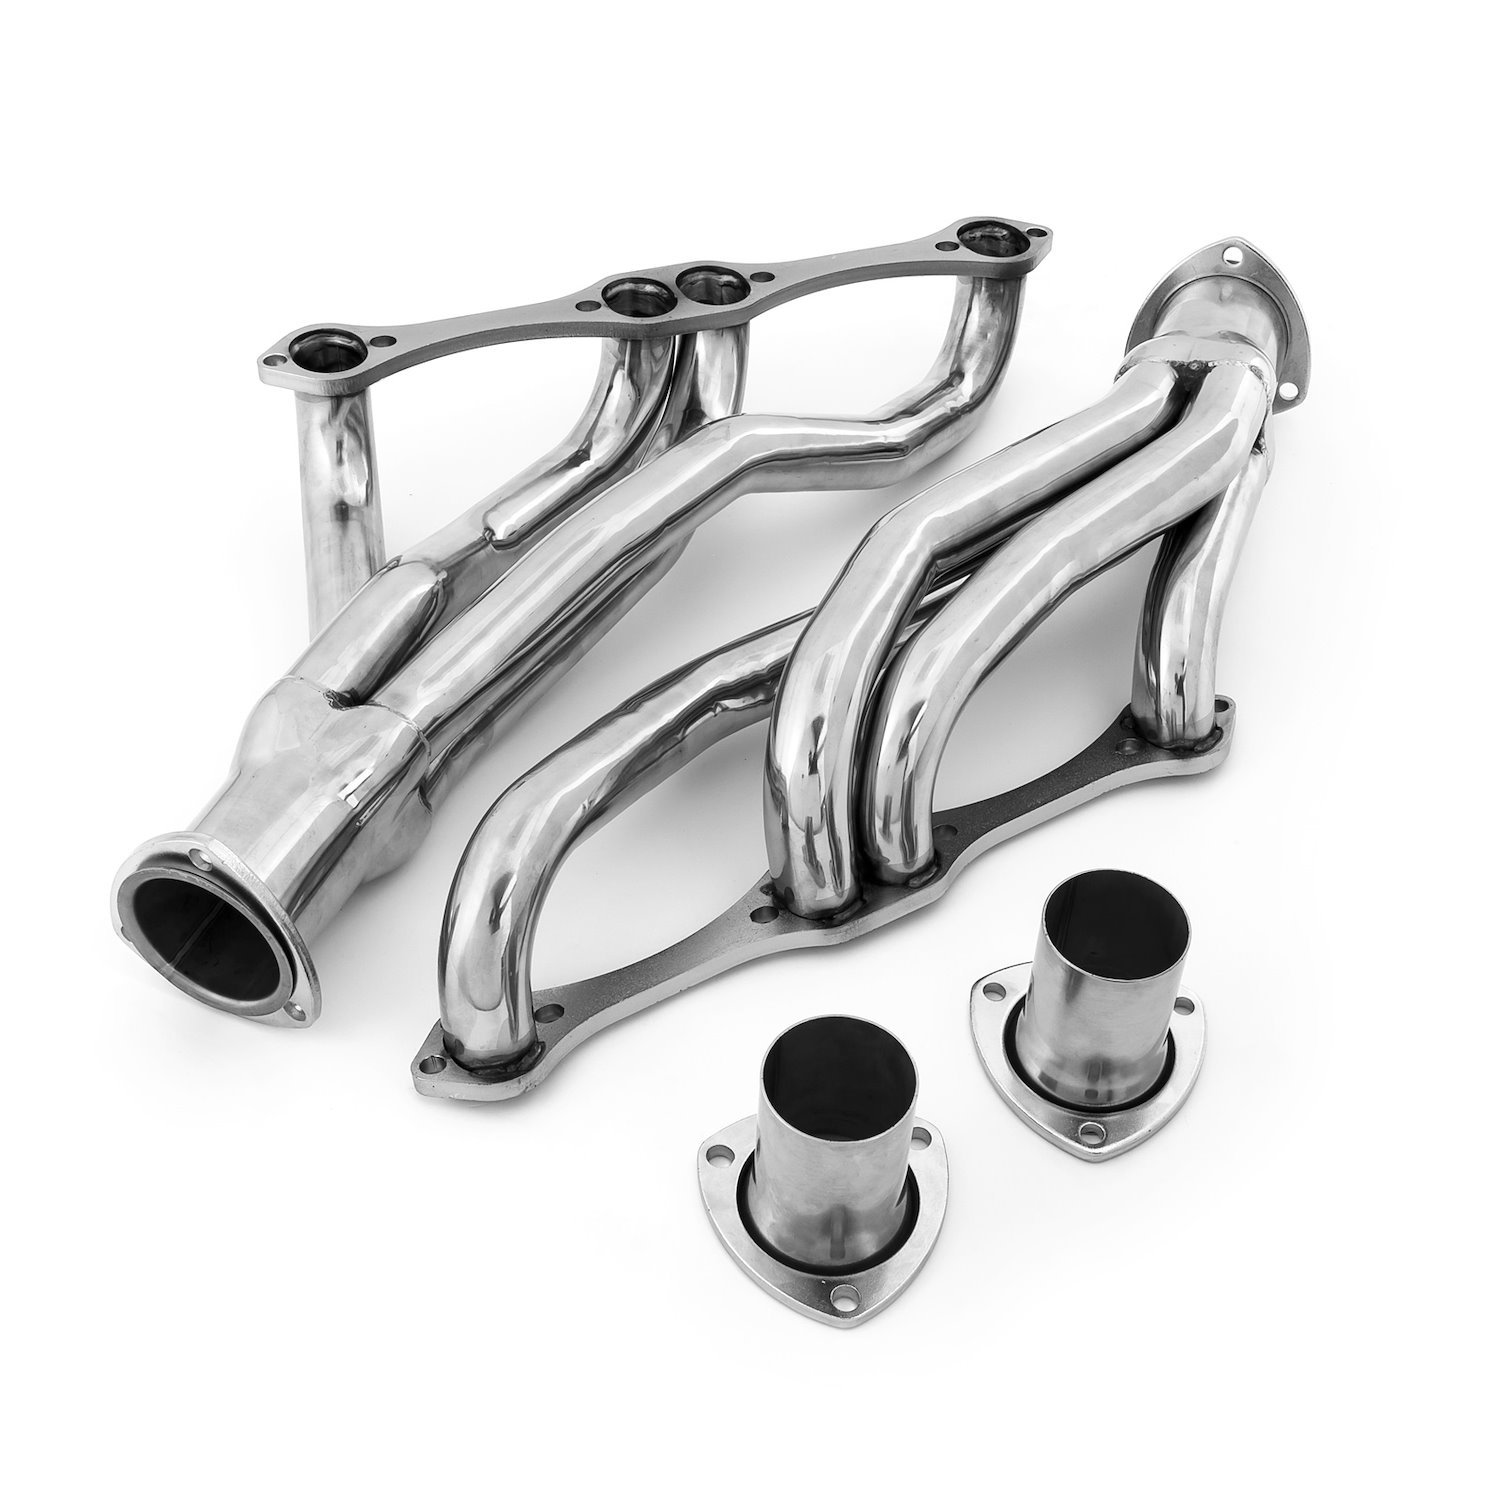 PCE316.1022.01 Stainless Steel Exhaust Headers 1967-1981 Chevy Chevelle/Camaro 350